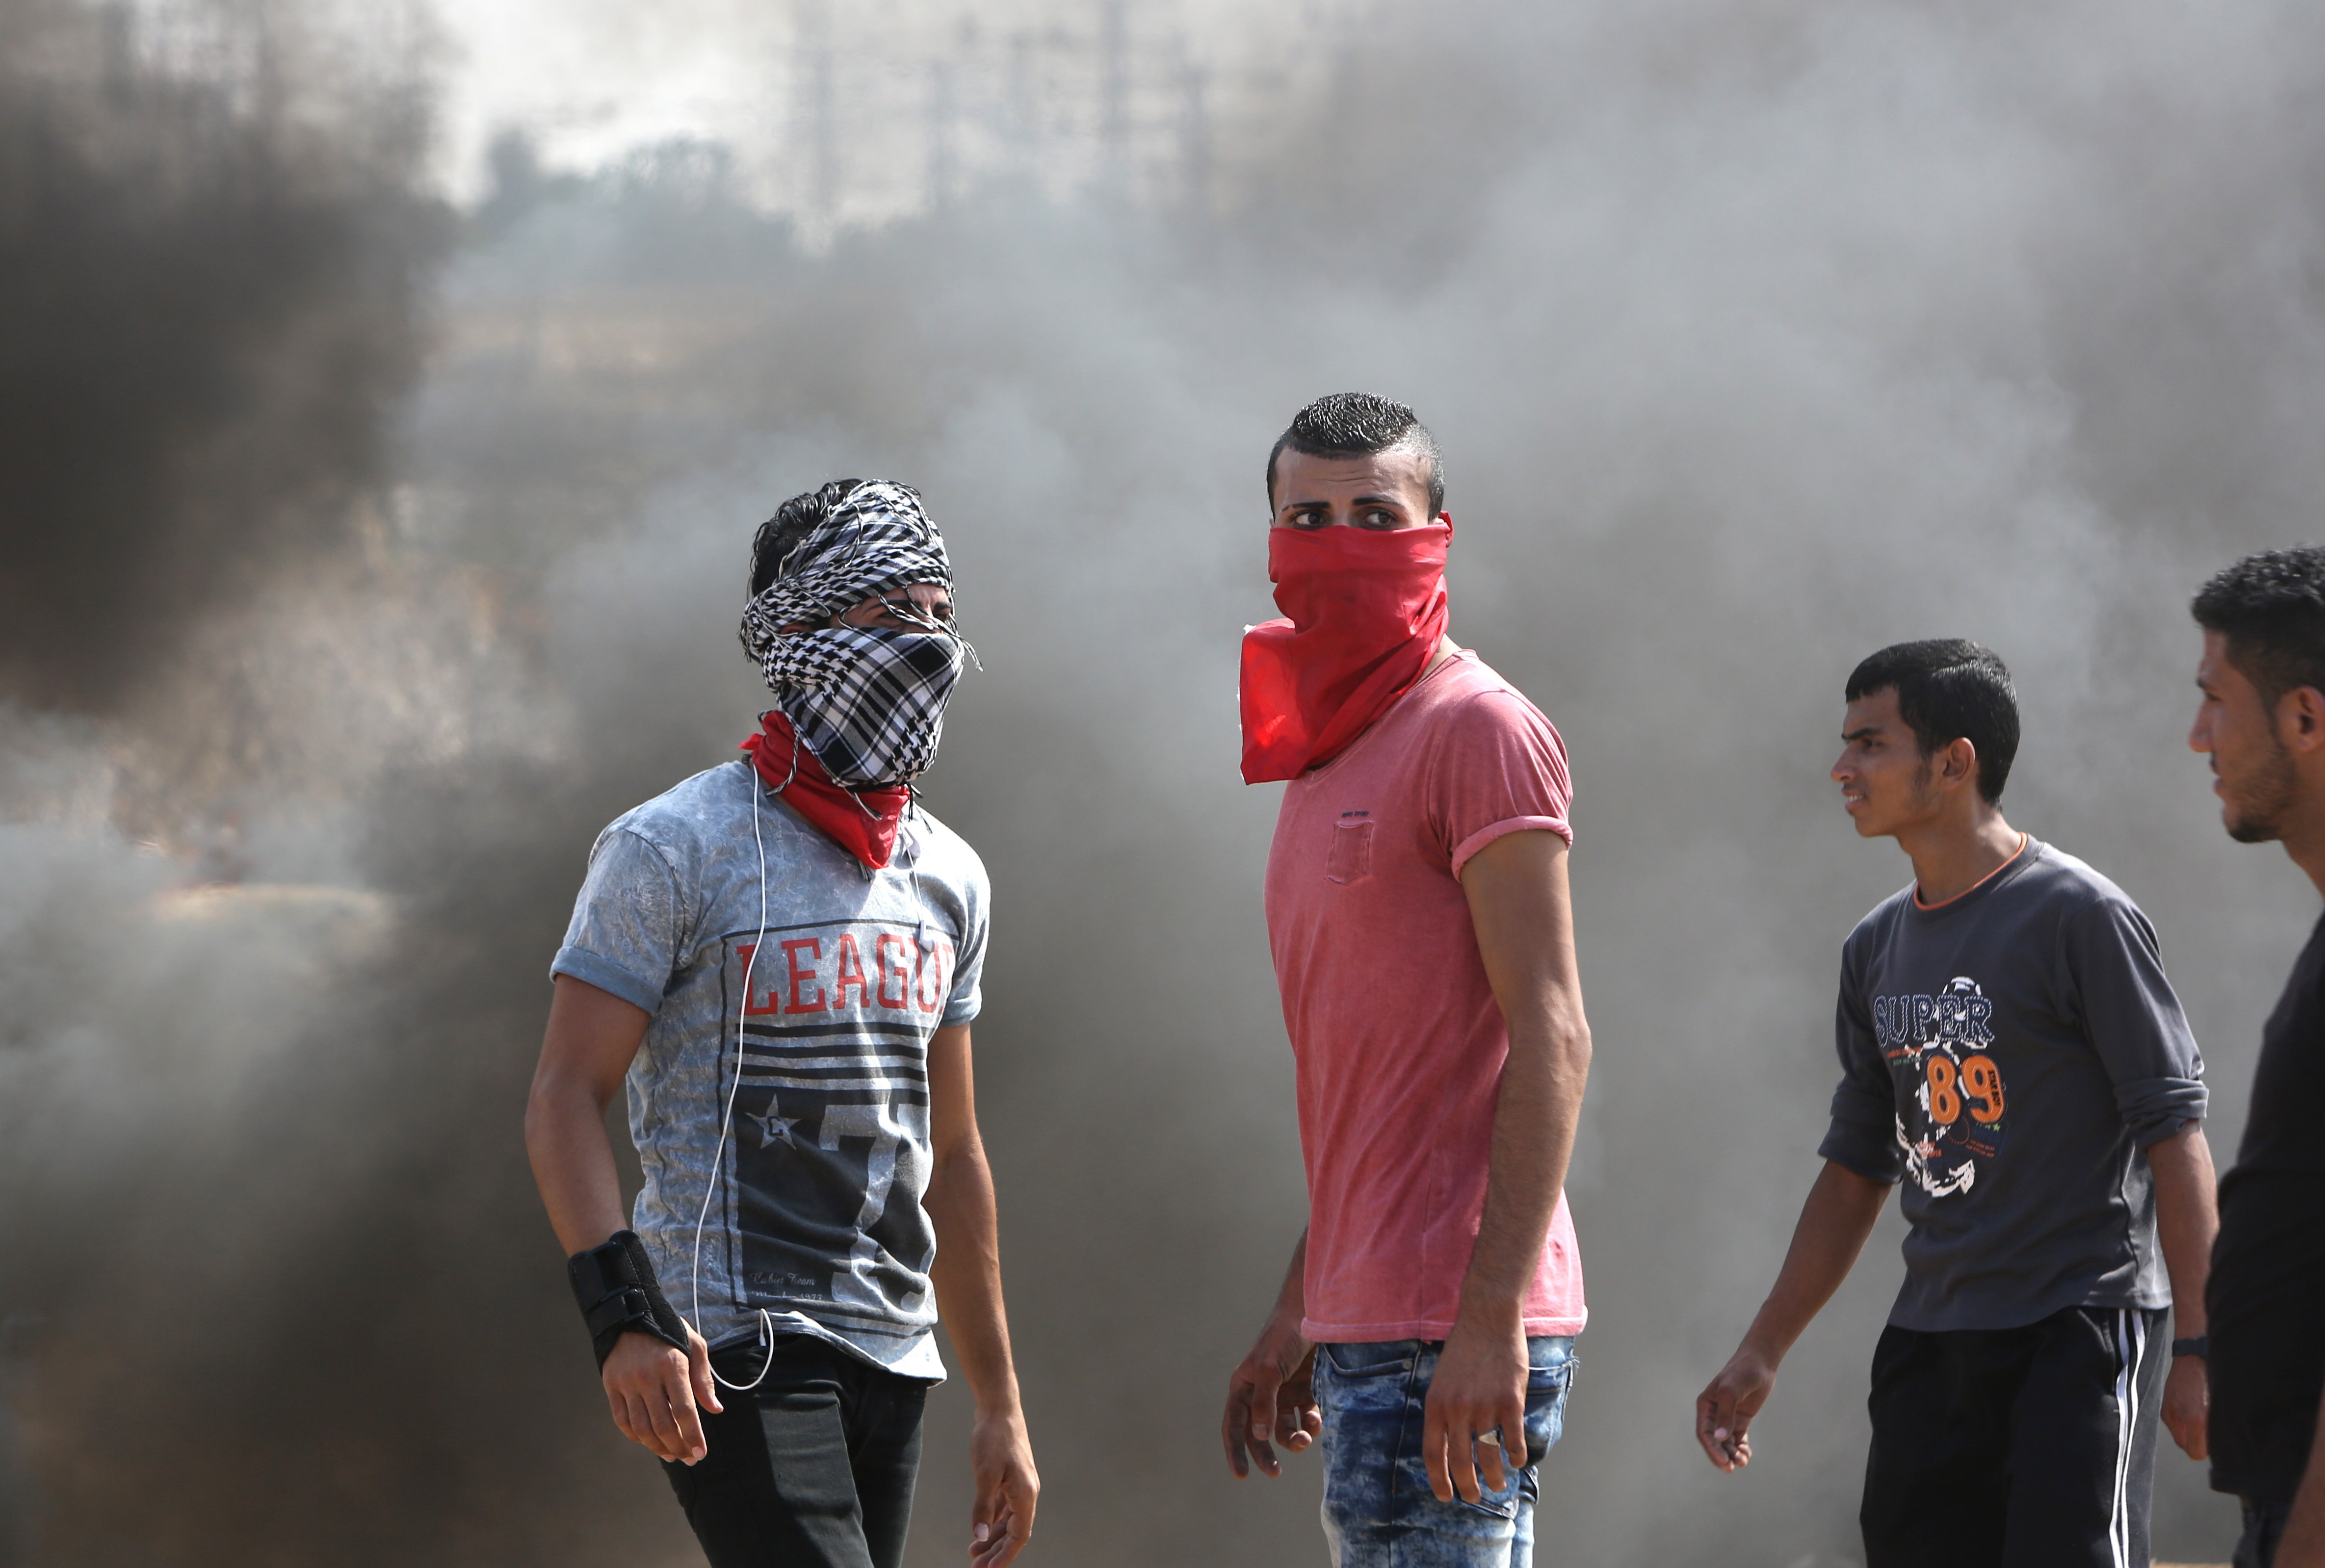 Palestinian protesters stand amid smoke during clashes with Israeli security forces near the Nahal Oz border crossing with Israel, east of Gaza City on Oct. 10, 2015. (Mahmud Hams—AFP/Getty Images)